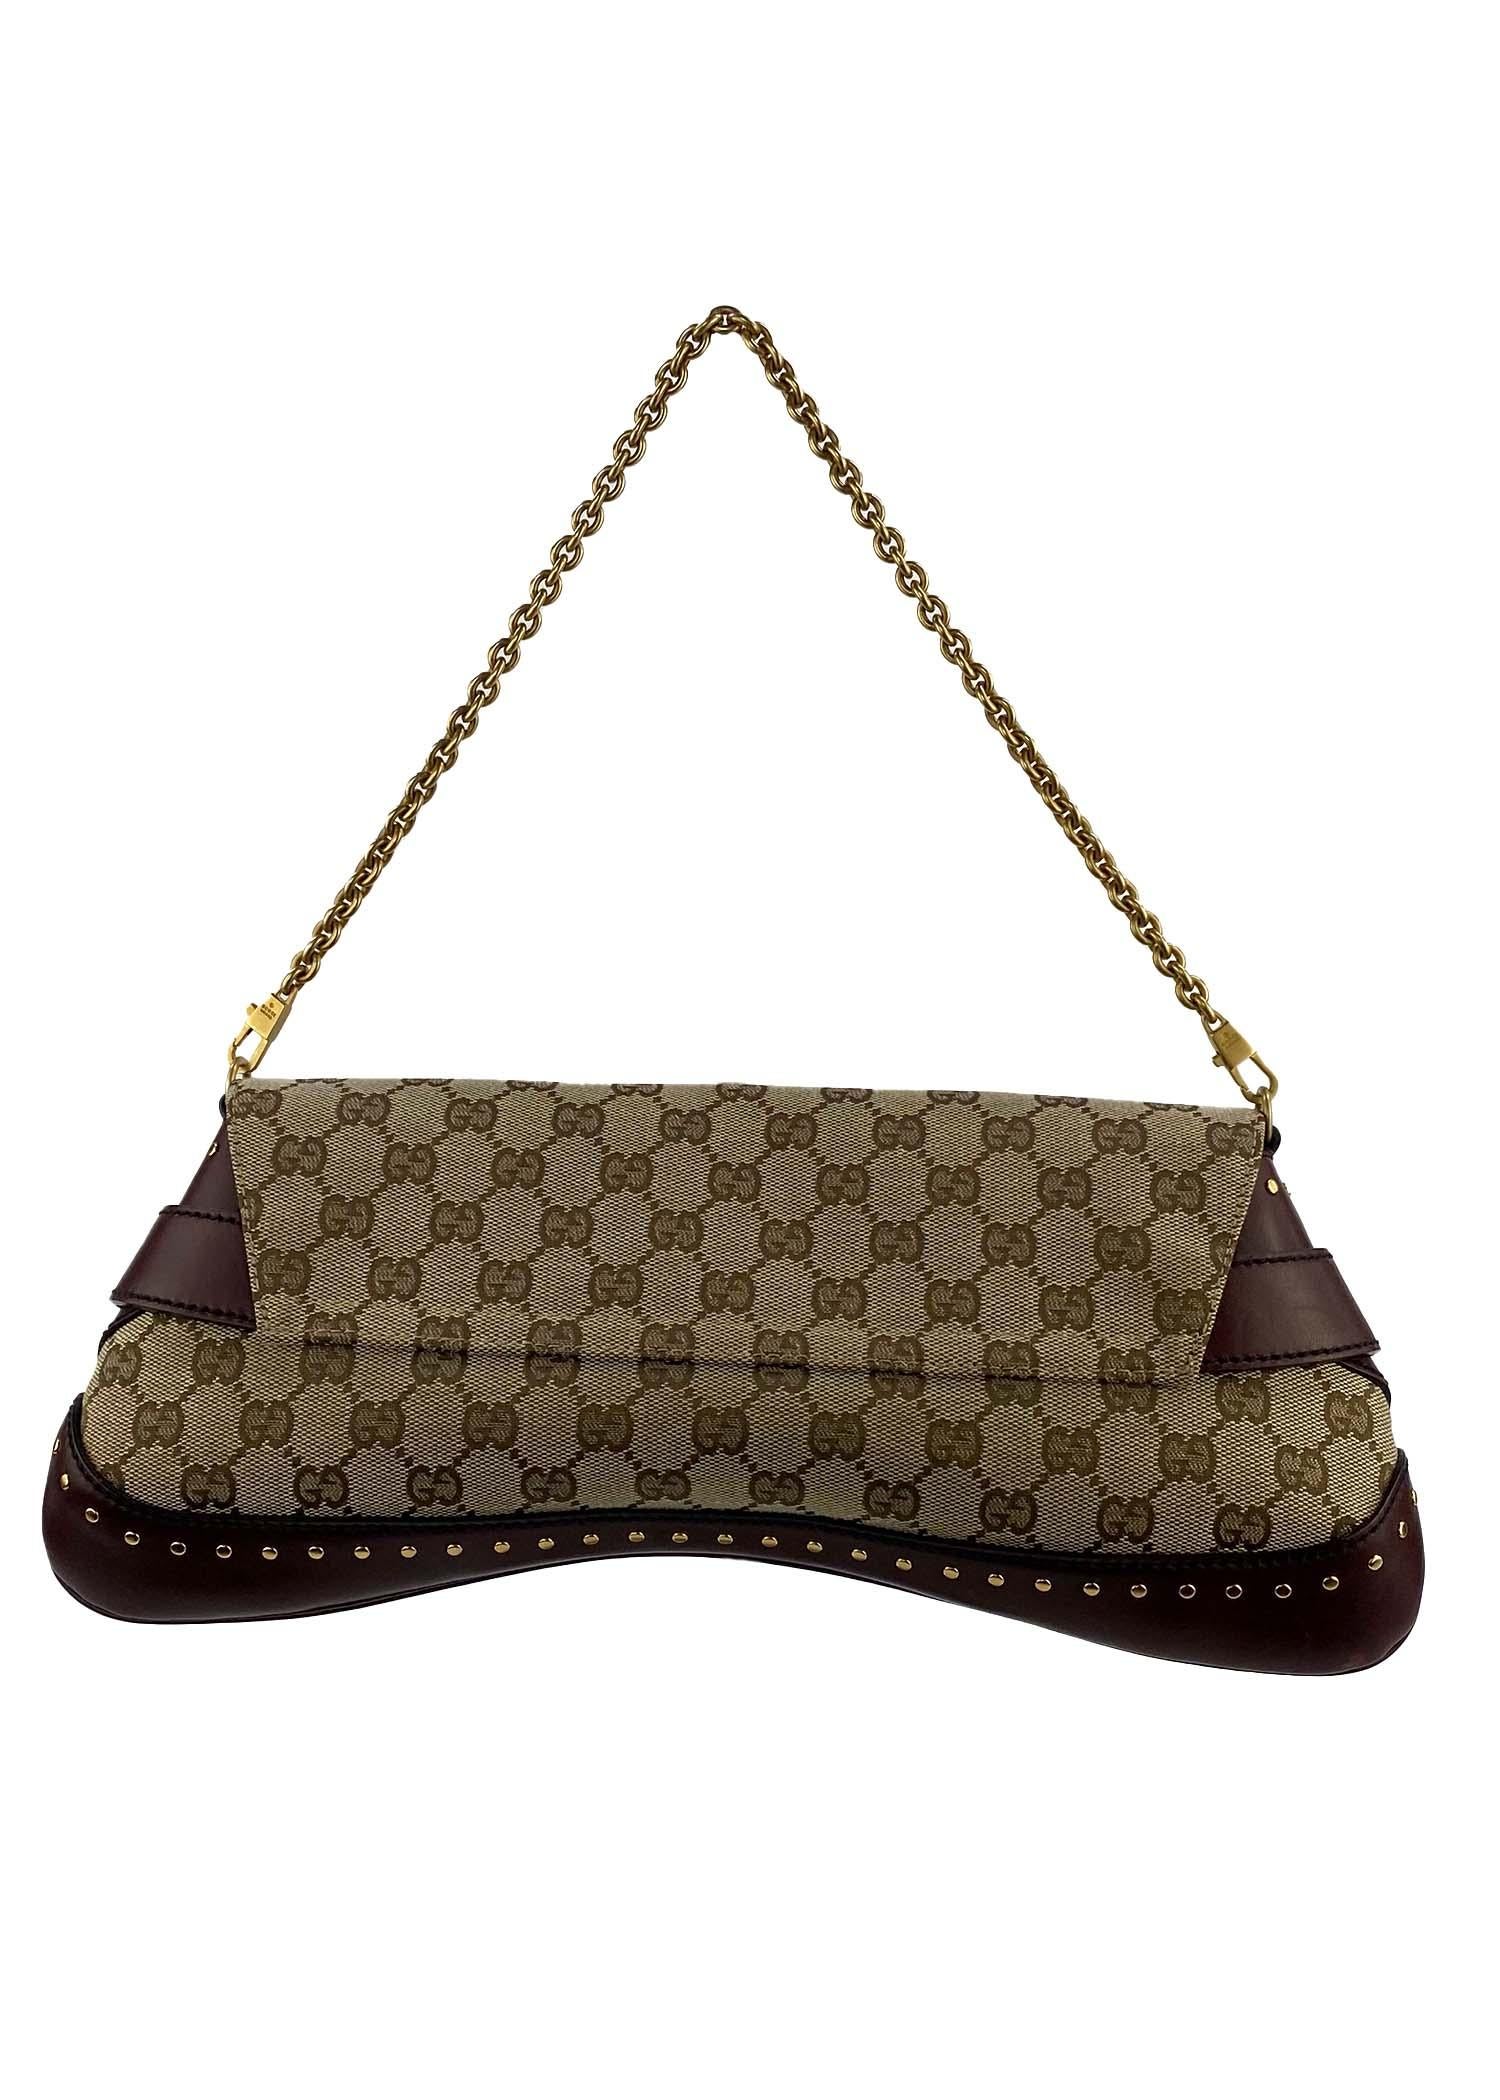 TheRealList presents: Designed by Tom Ford during his tenure at the house of Gucci, this bag represents Tom's interpretation of many of Gucci's classic elements, the most prominent being the large horse-bit. This large evening convertible bag is